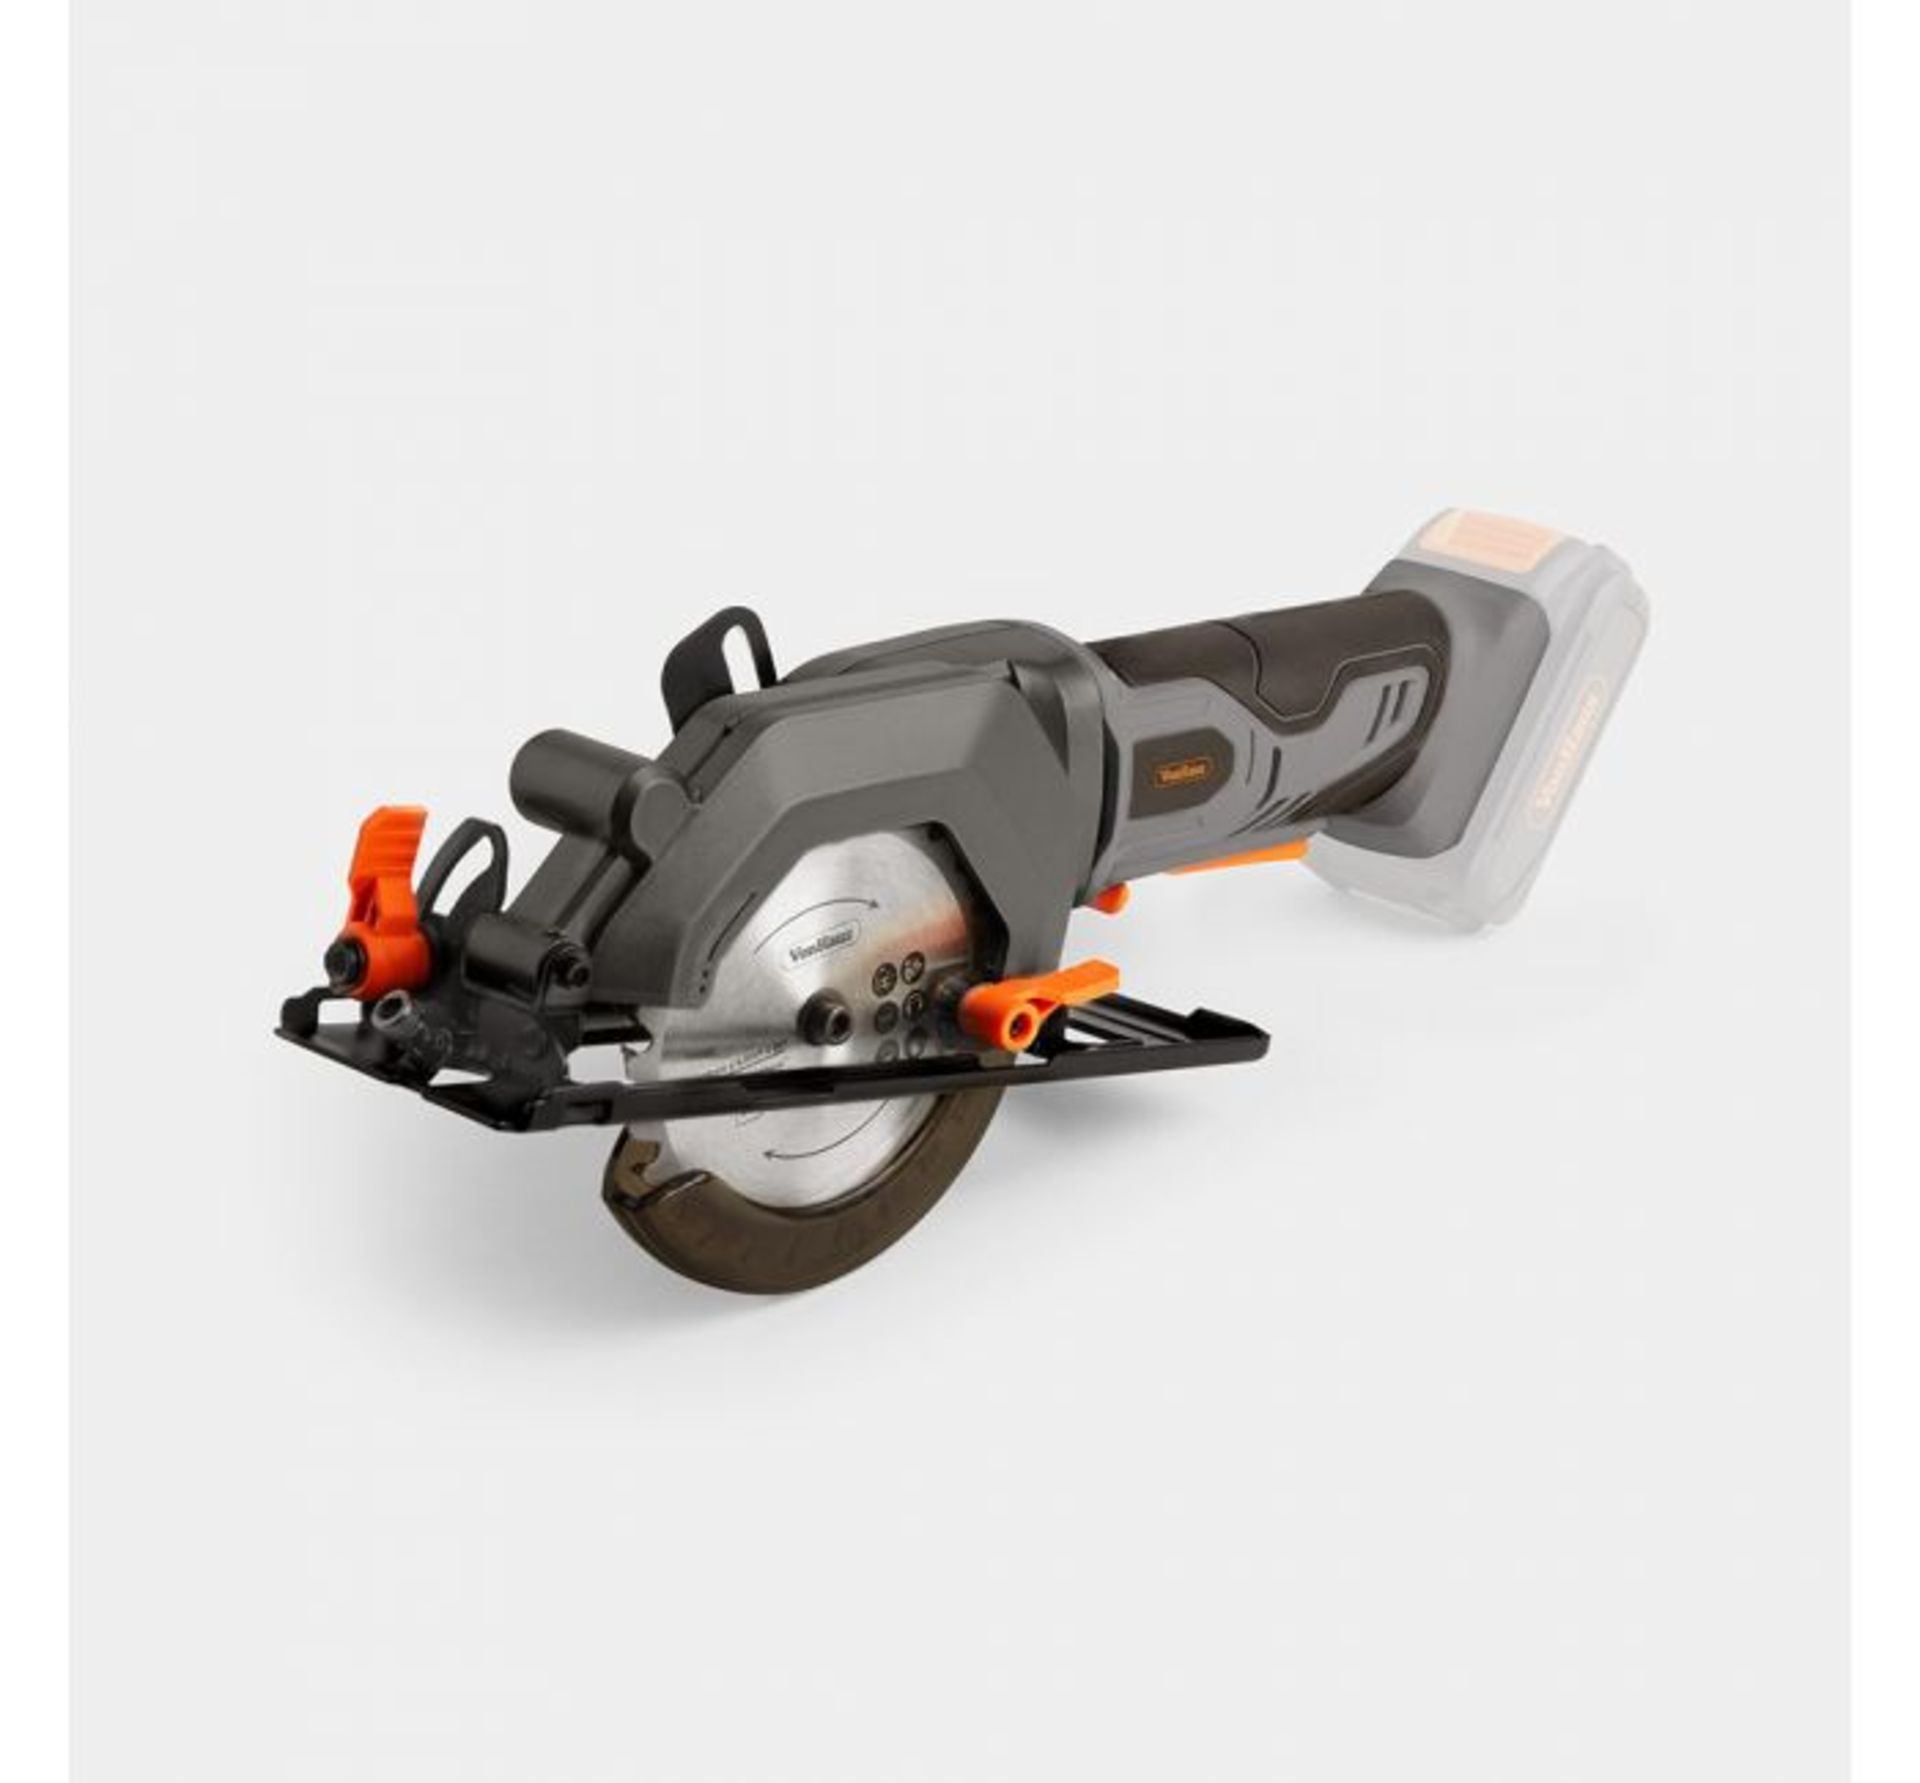 (JH40) E-Series Cordless Circular Saw Make bevel angle cuts and joint cuts in MDF, hardwood ...